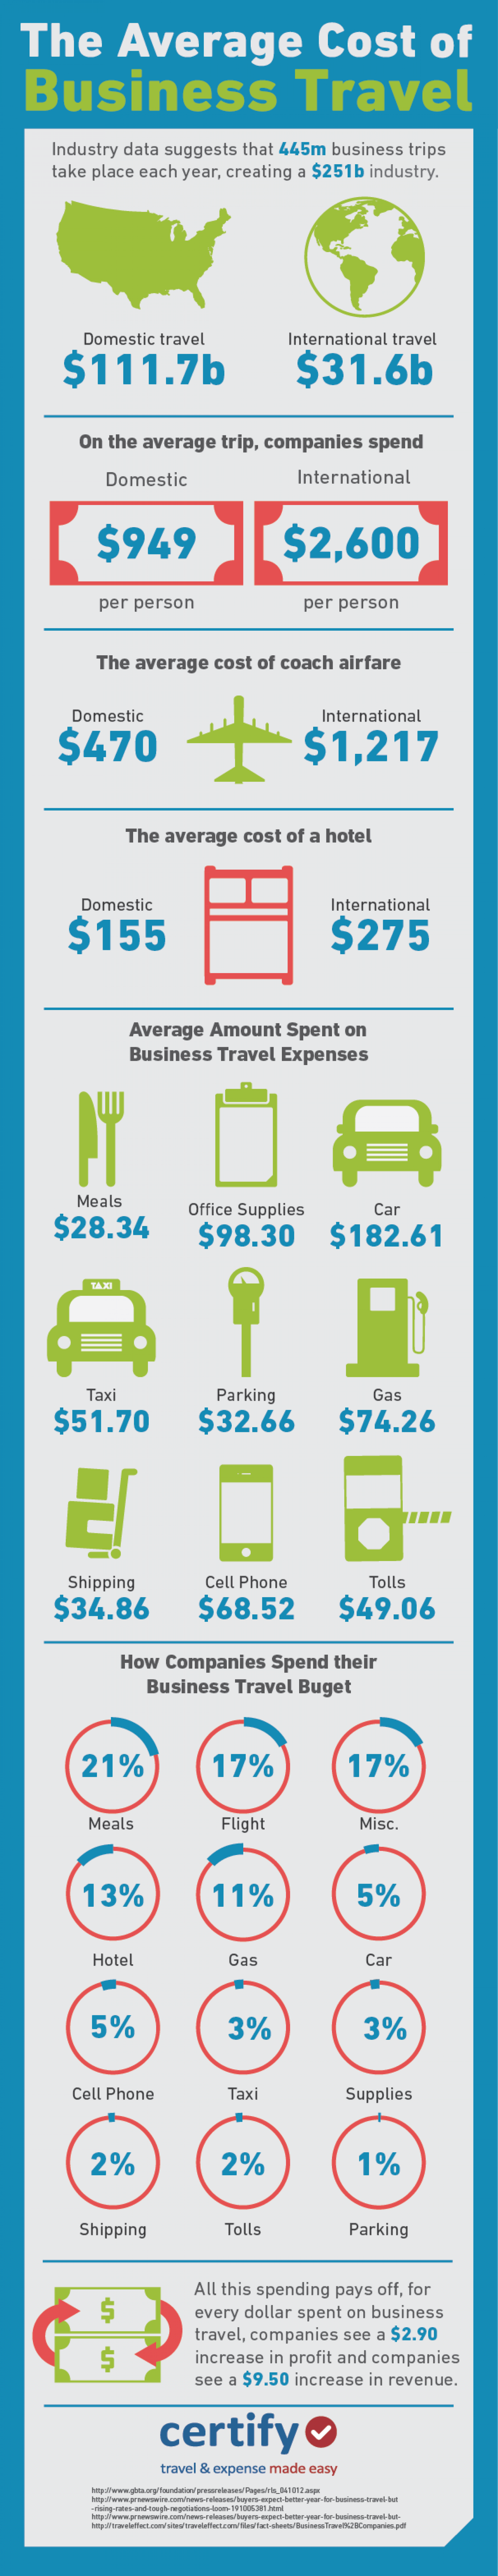 The Average Cost of Business Travel Infographic